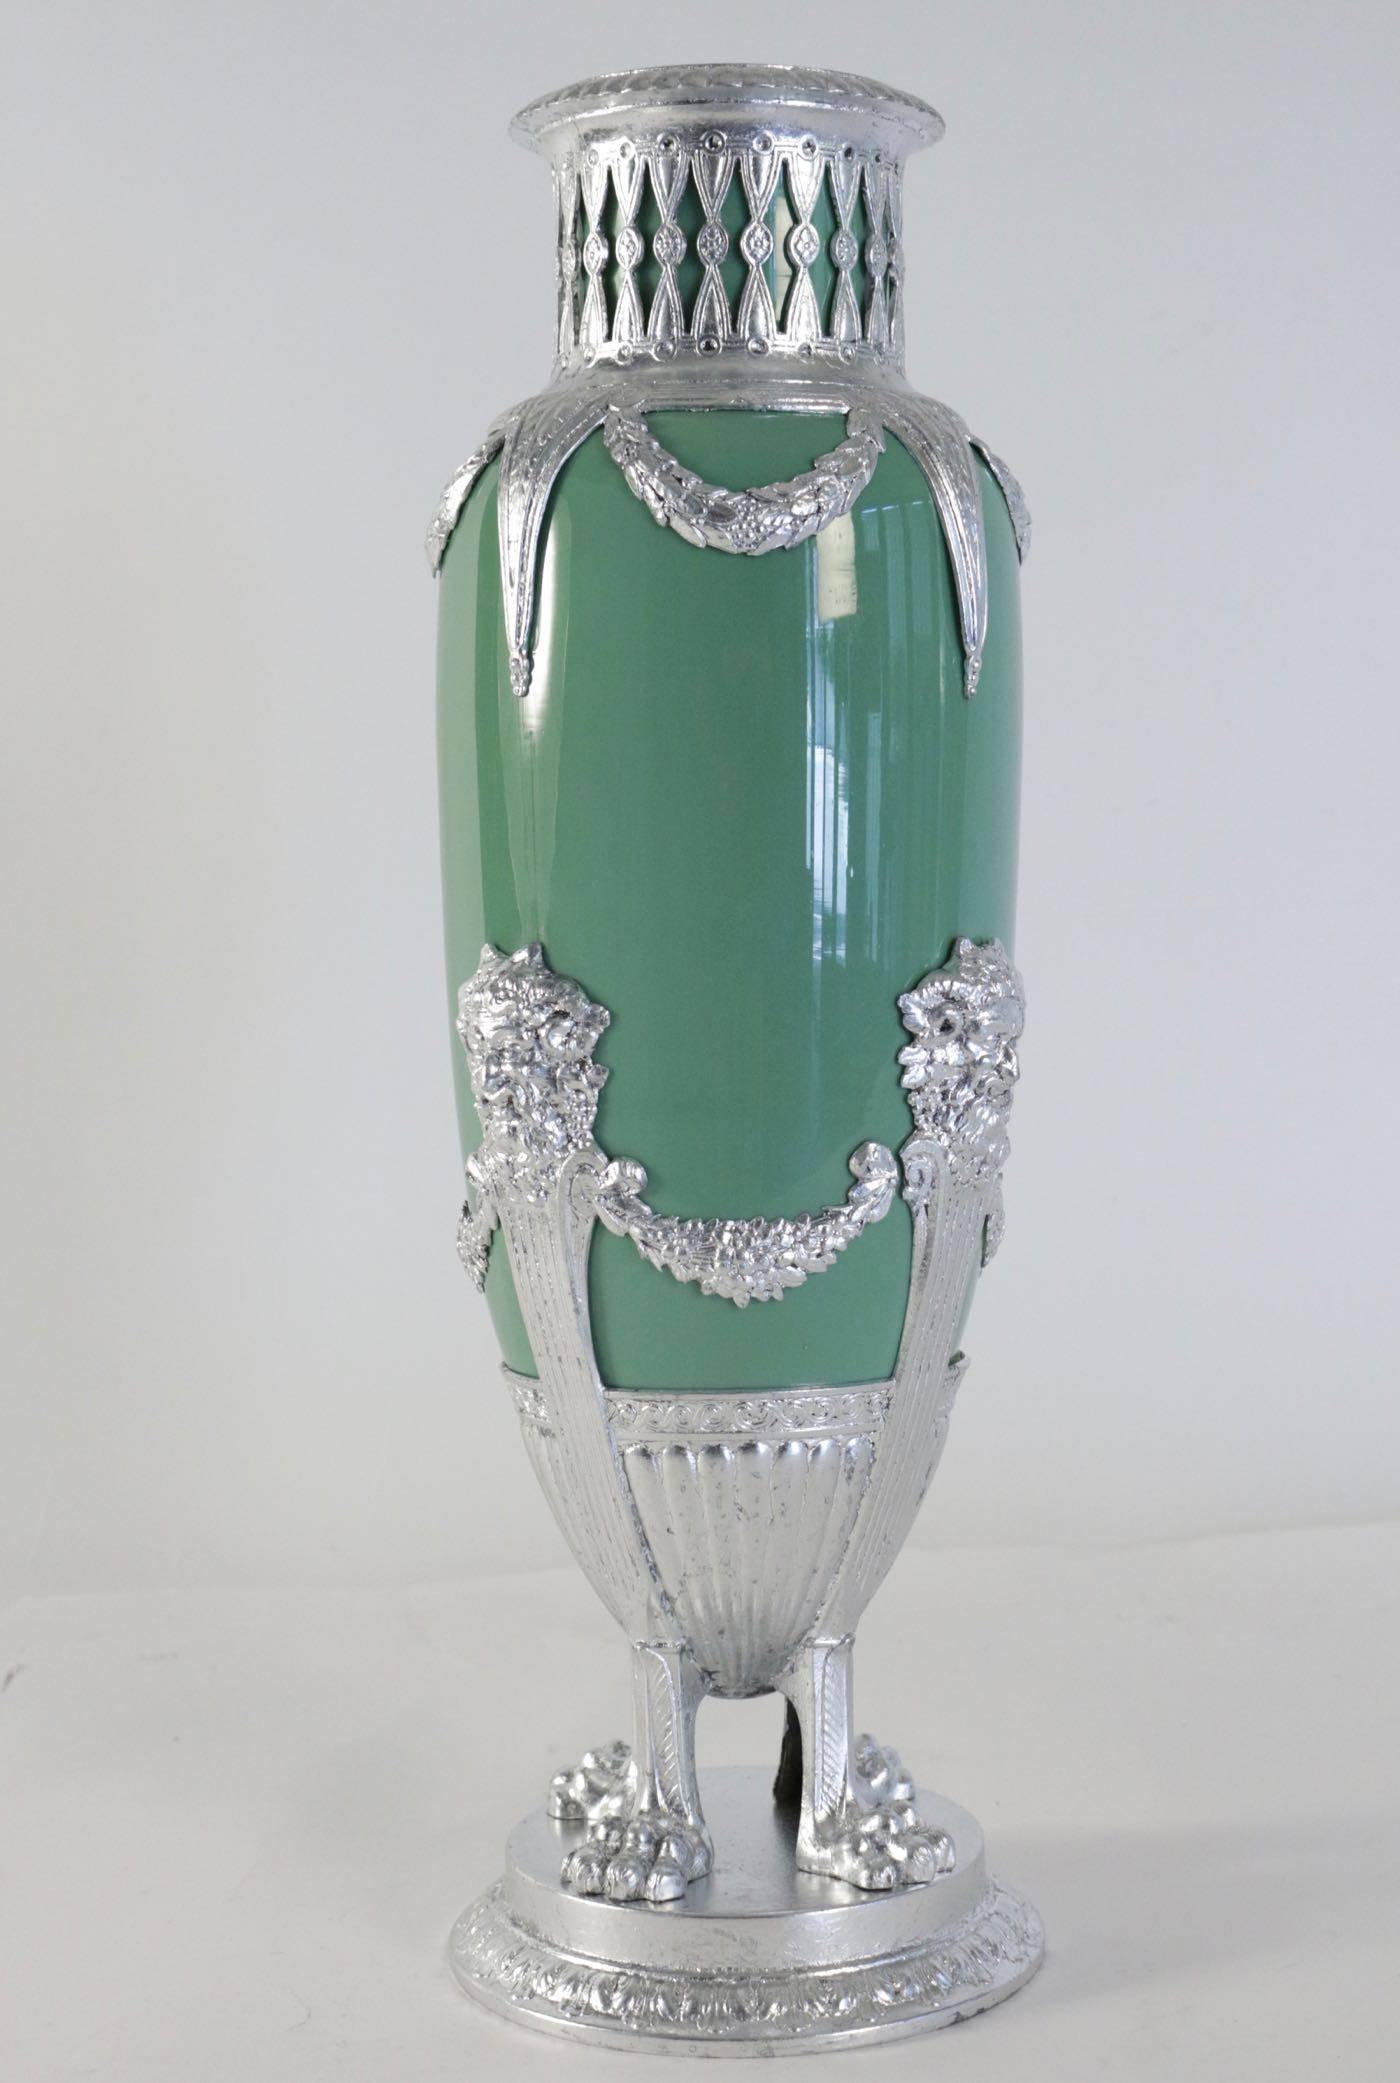 Celadon Vase in Faience, Silver Plate and Silver Leaf, 19th Century Period In Good Condition For Sale In Saint-Ouen, FR